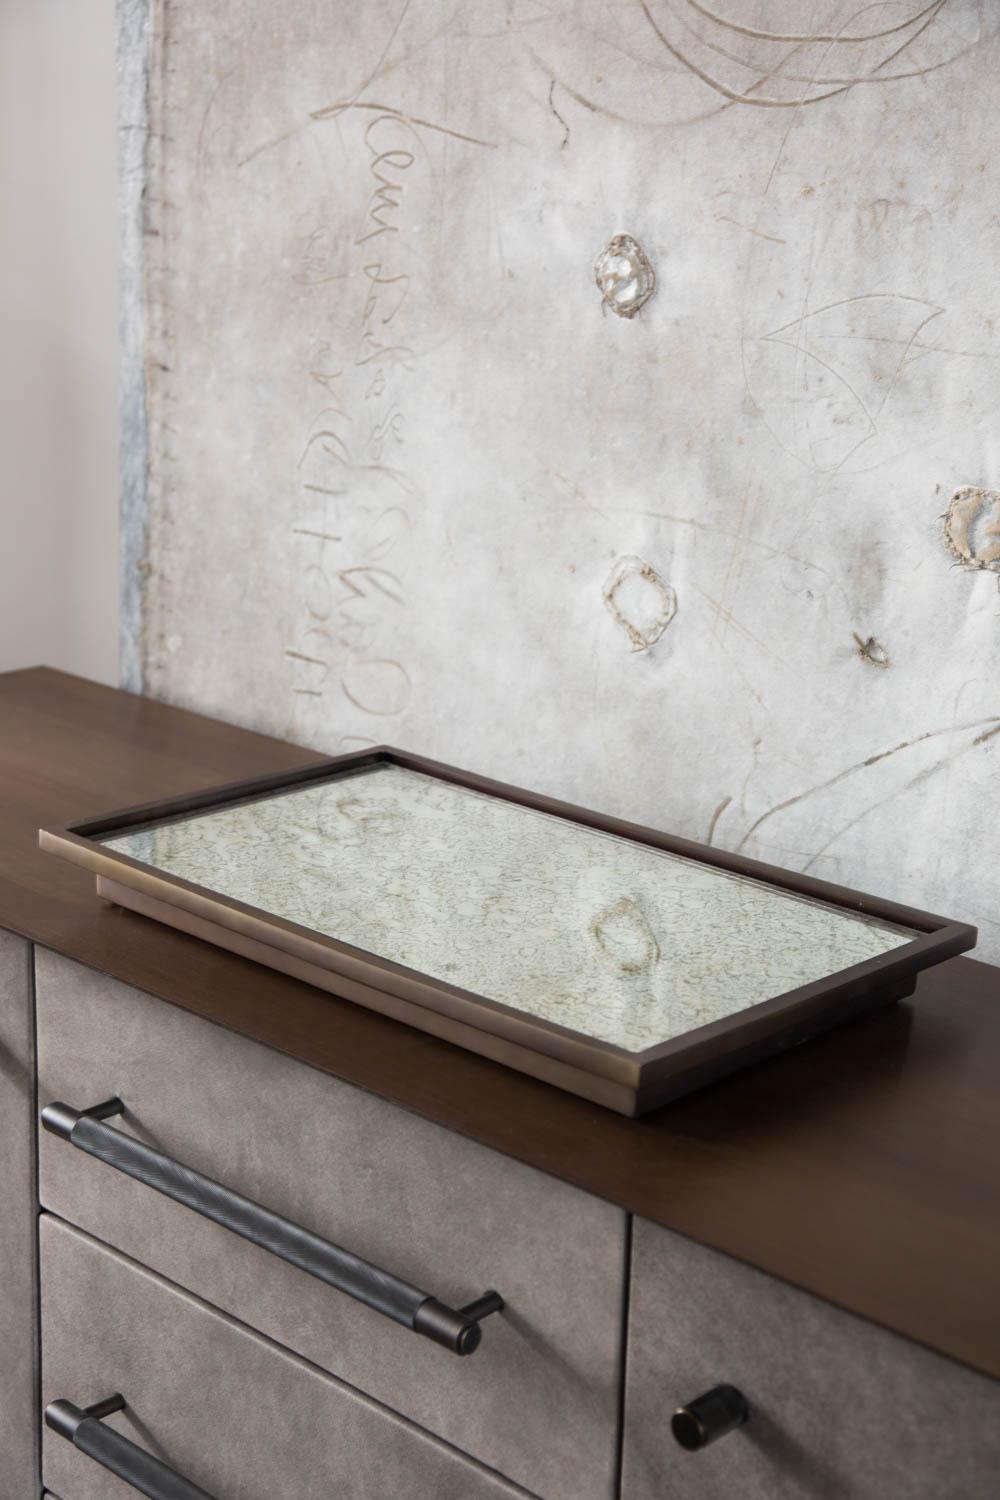 Modern Vulcano Tray Plated with Antique Mirror Surface